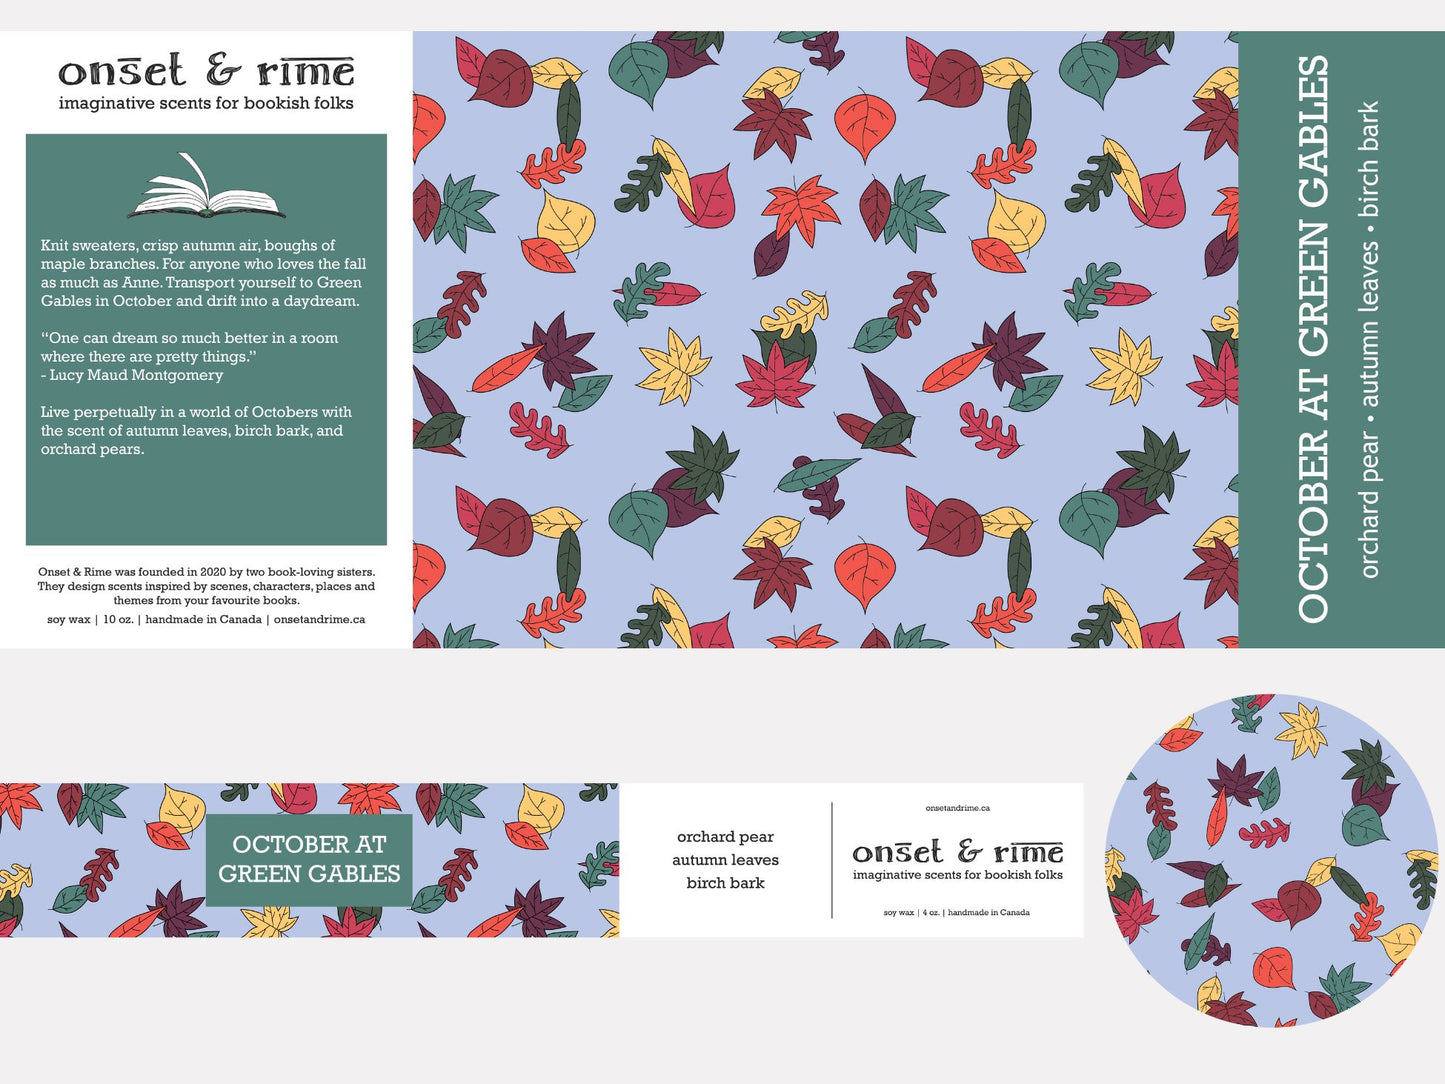 A close up view of the label for the Onset & Rime pear scented candle called "October at Green Gables". The label is sky blue with a variety of autumn coloured leaves. The text on the label is "October at Green Gables - Orchard Pear, Autumn Leaves, Birch Bark".